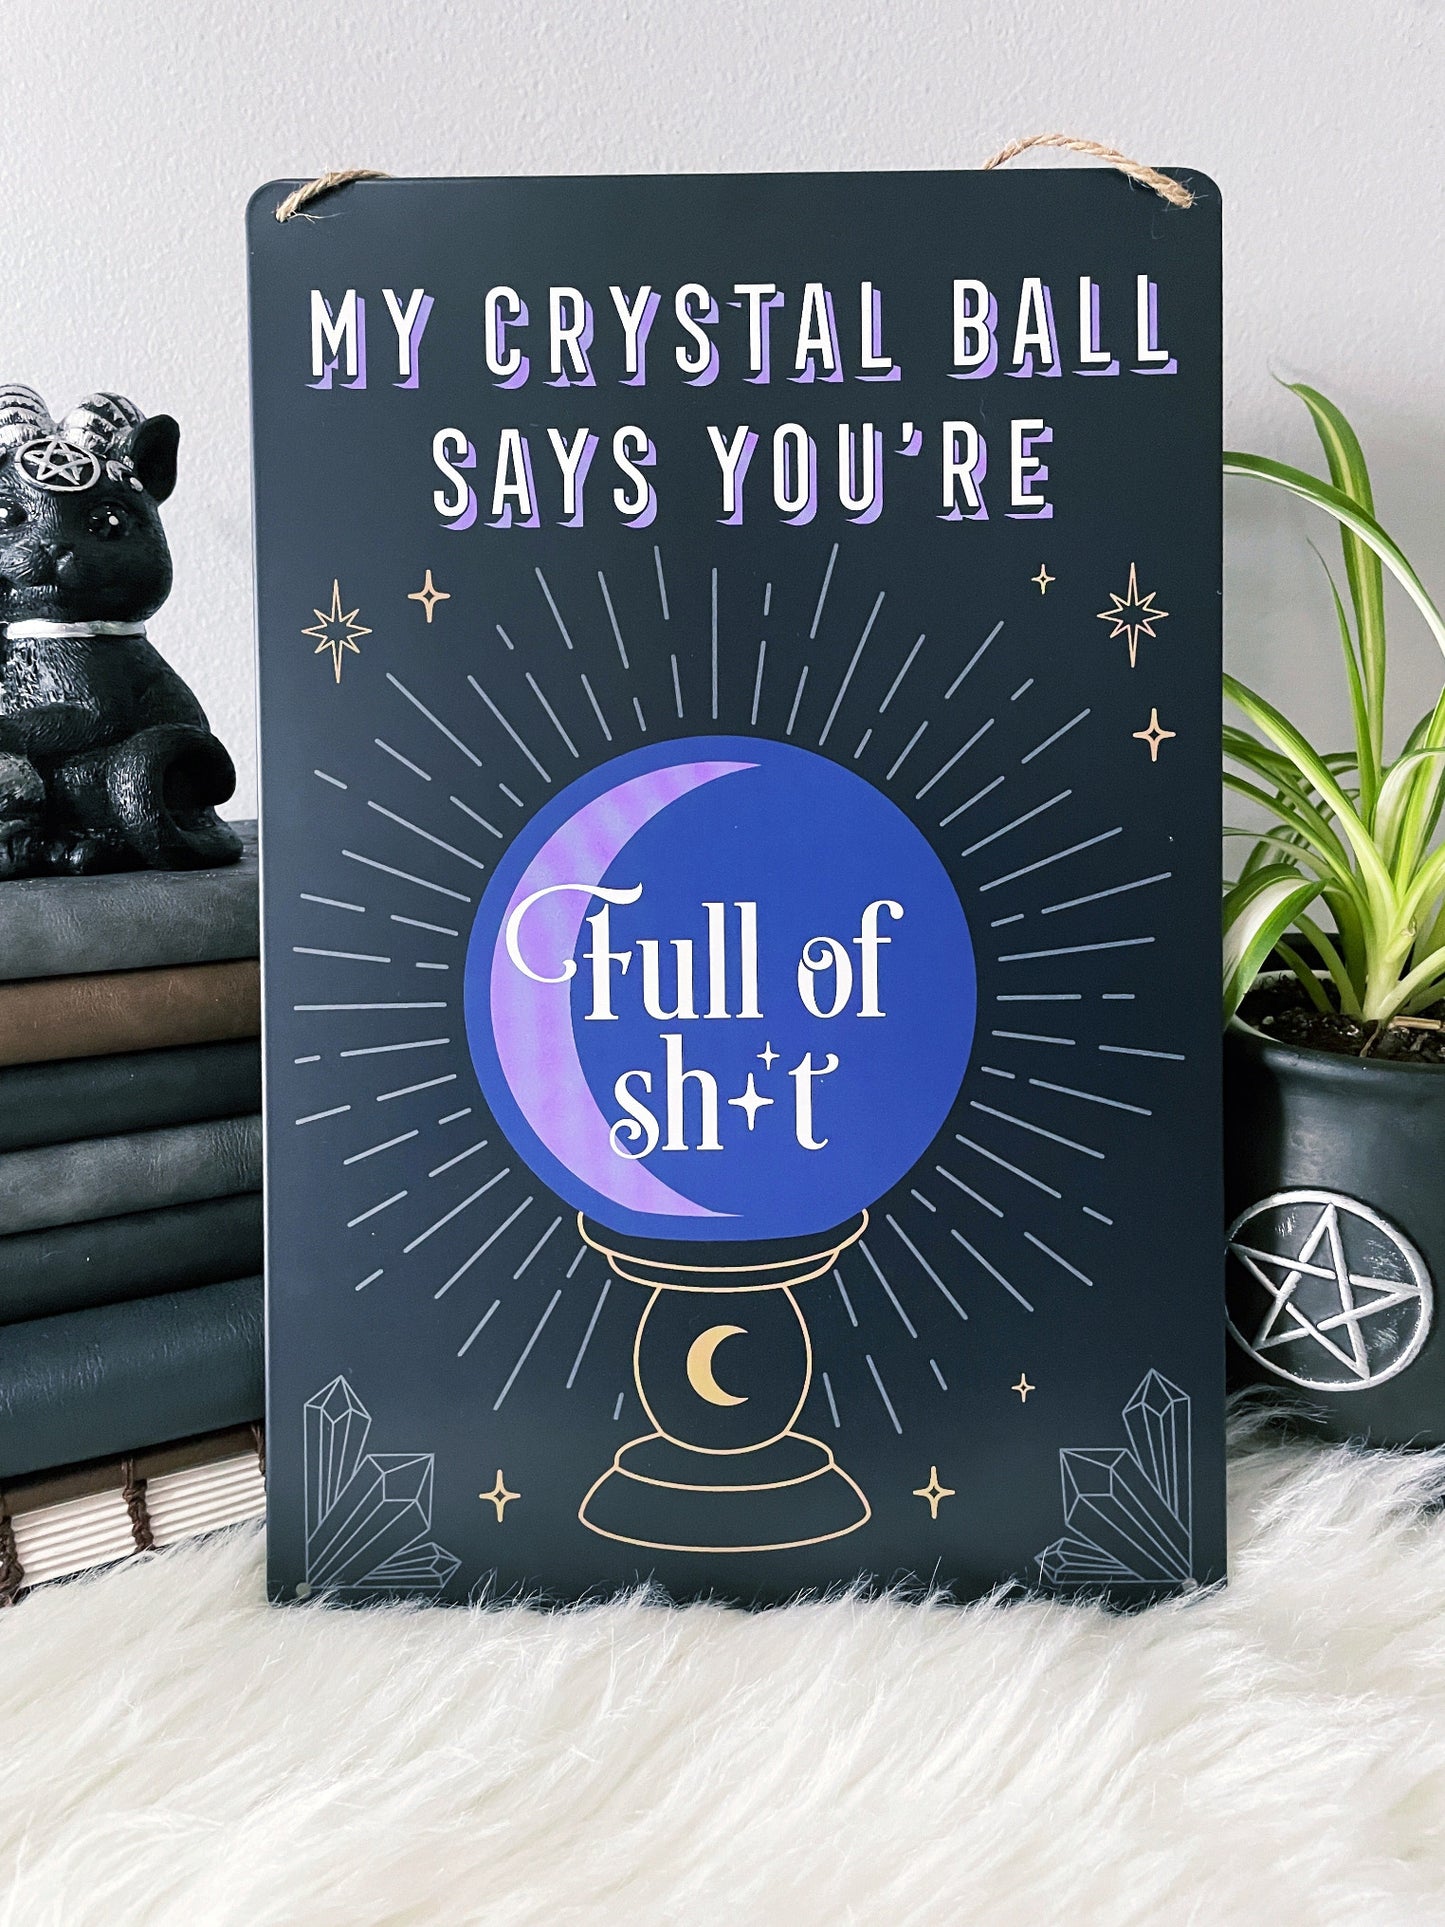 An image of a metal wall sign featuring a crystal ball design with the phrase "My crystal ball says you're full of shit" written in bold letters. The crystal ball design is illustrated in white against a deep purple background, with intricate lines and details that create a mystical and magical look.